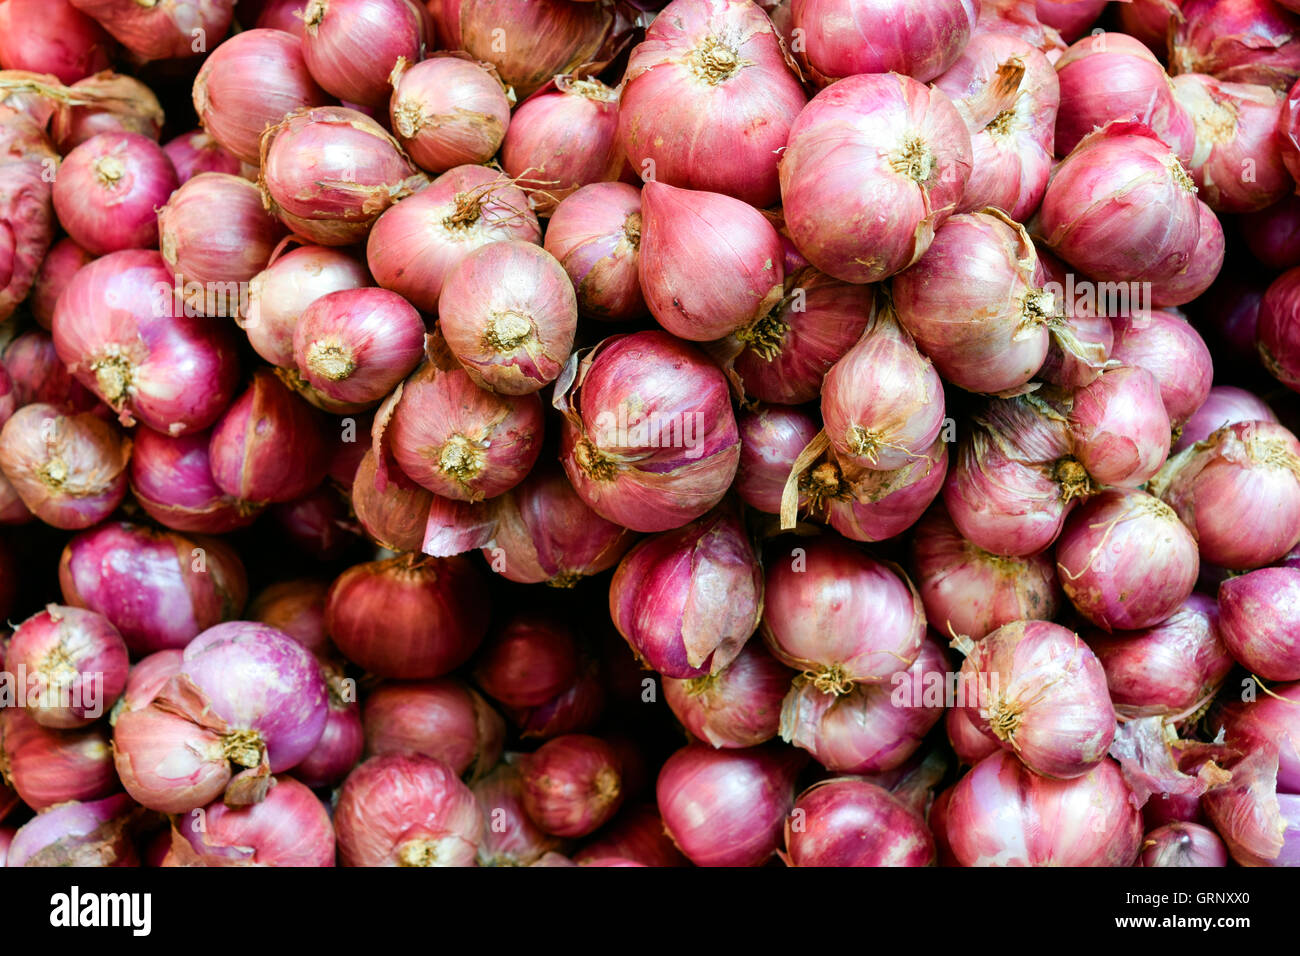 Close Up of Shallots or Red Spanish Onion Stock Image - Image of nutrition,  herb: 177447599